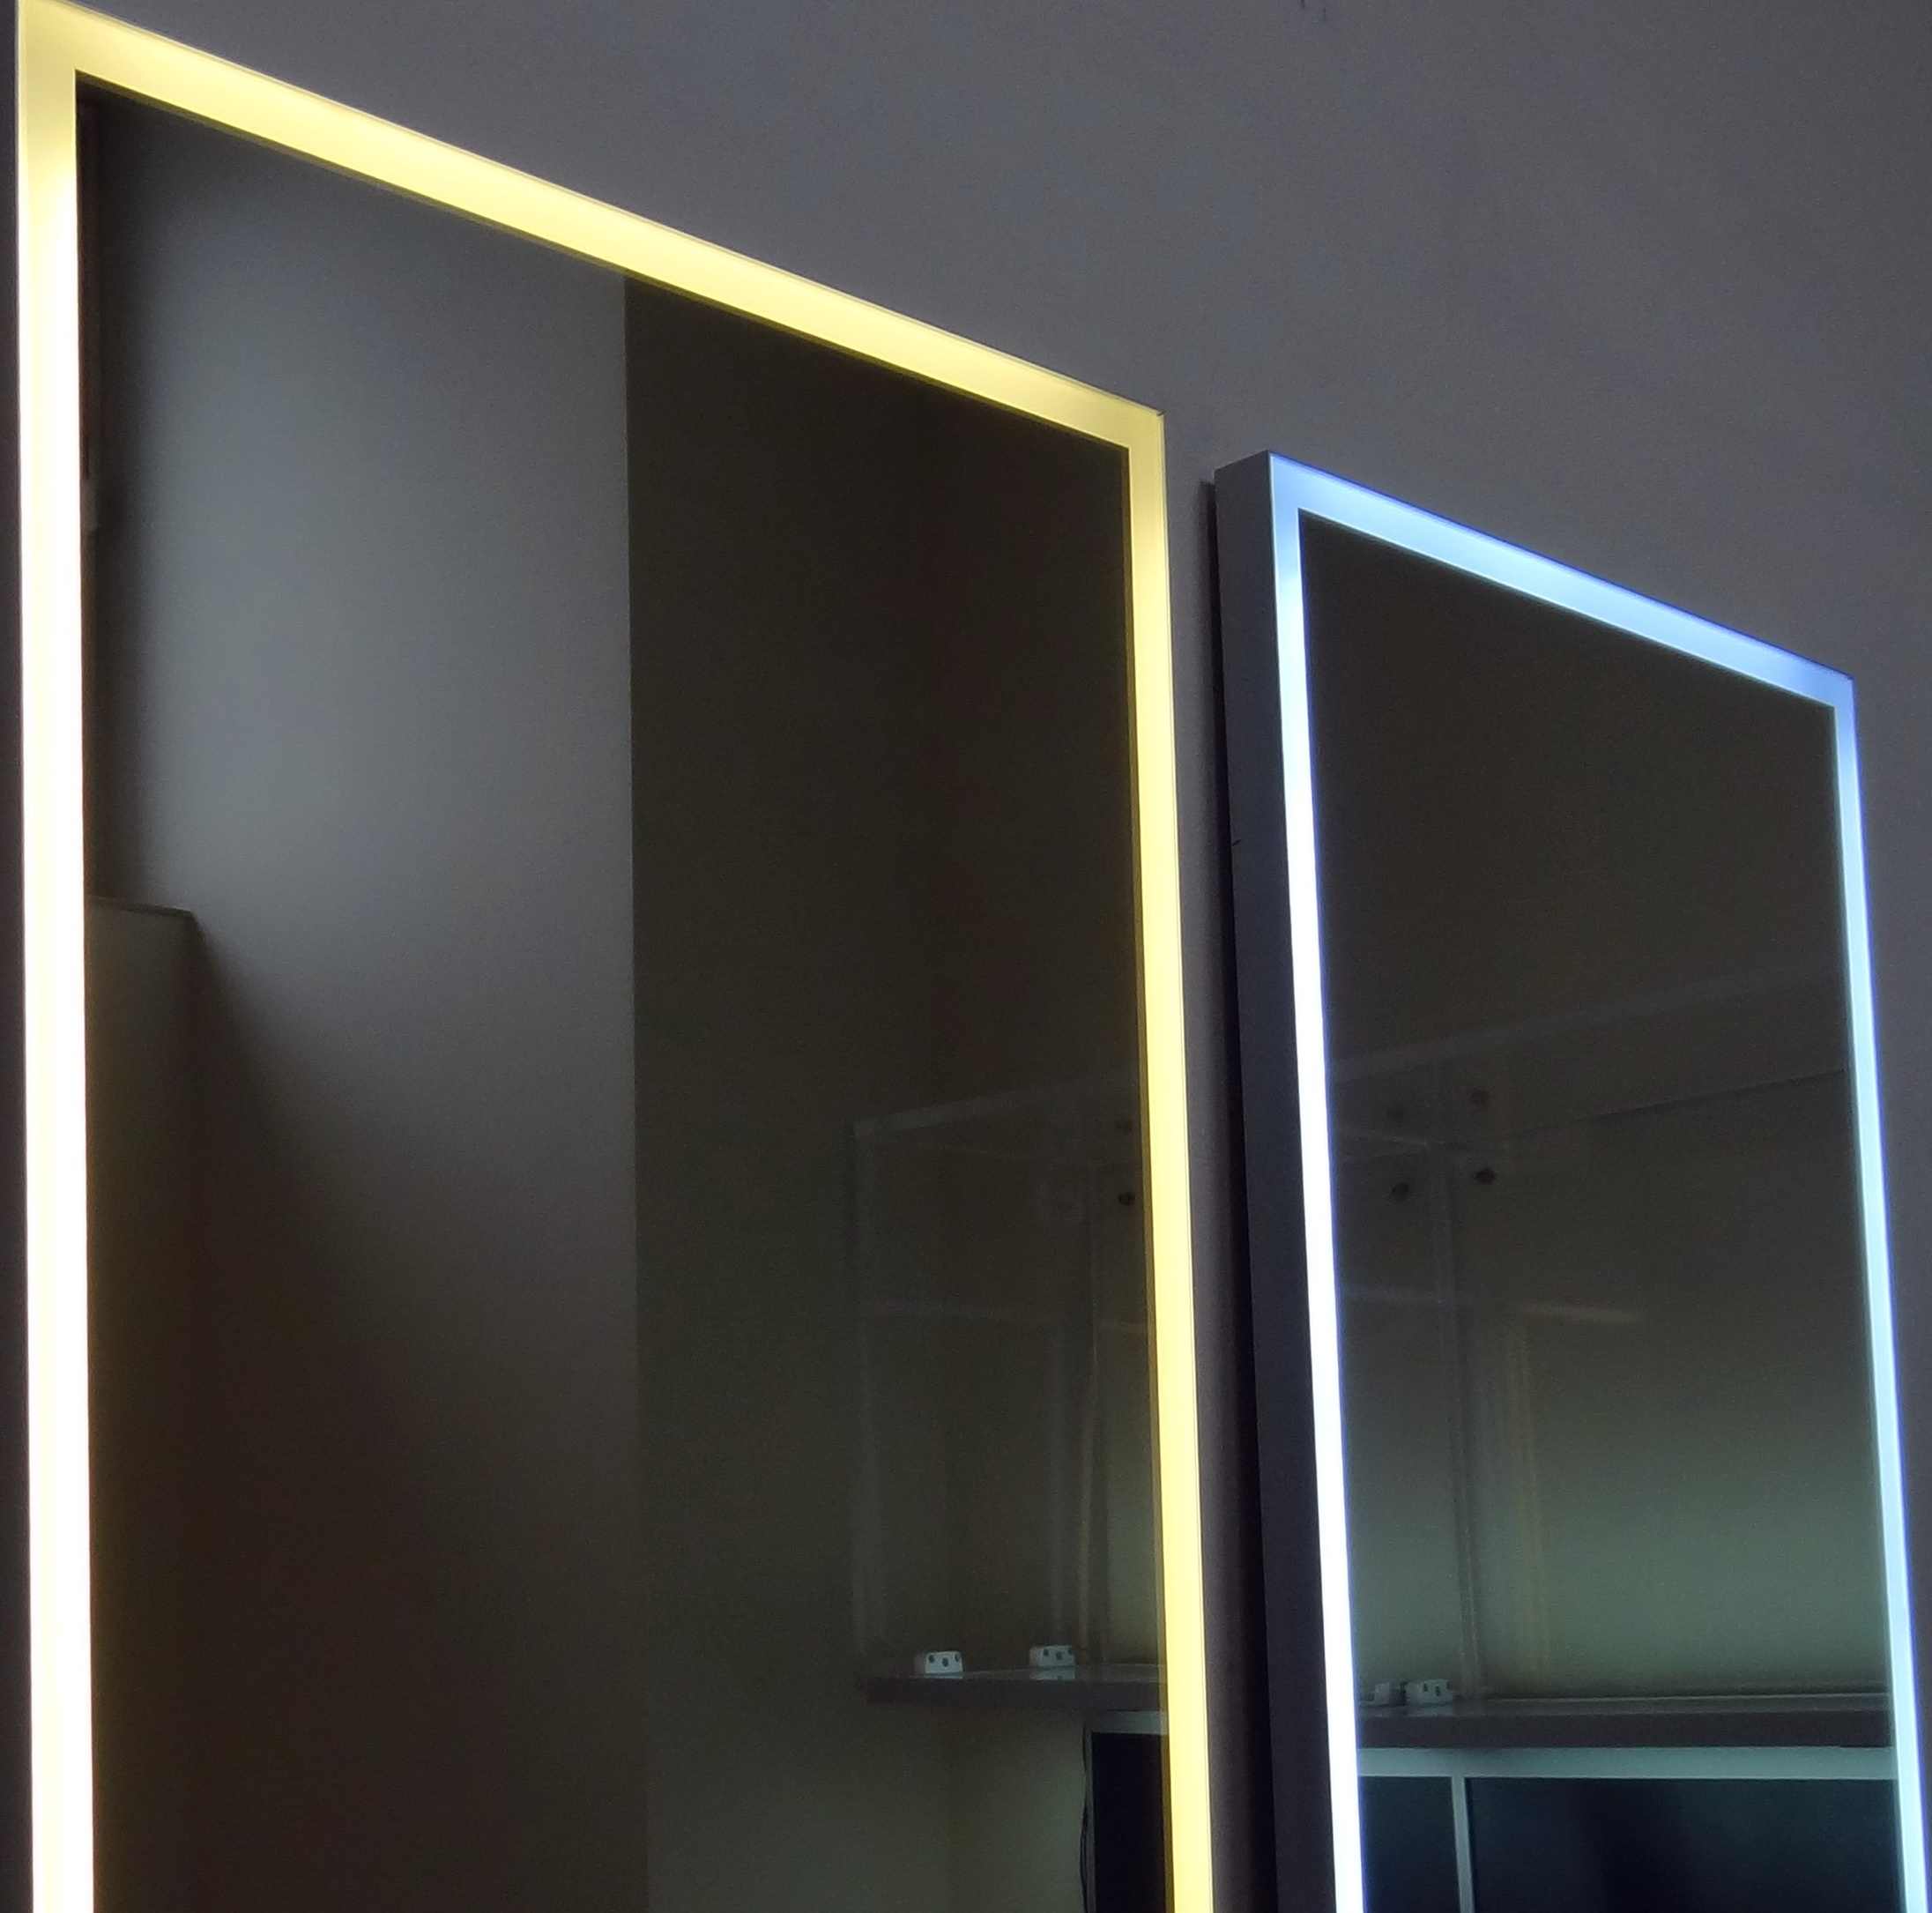 Cabinet With Mirror For Bathroom Led Lights For A Mirror <a href='/bathroom-mirror/'>Bathroom Mirror</a> Cabinets With Led Lights Shining Design Bathroom Cabinet Mirror Corner Mirror Bathroom Cabinet Uk  imparo.org